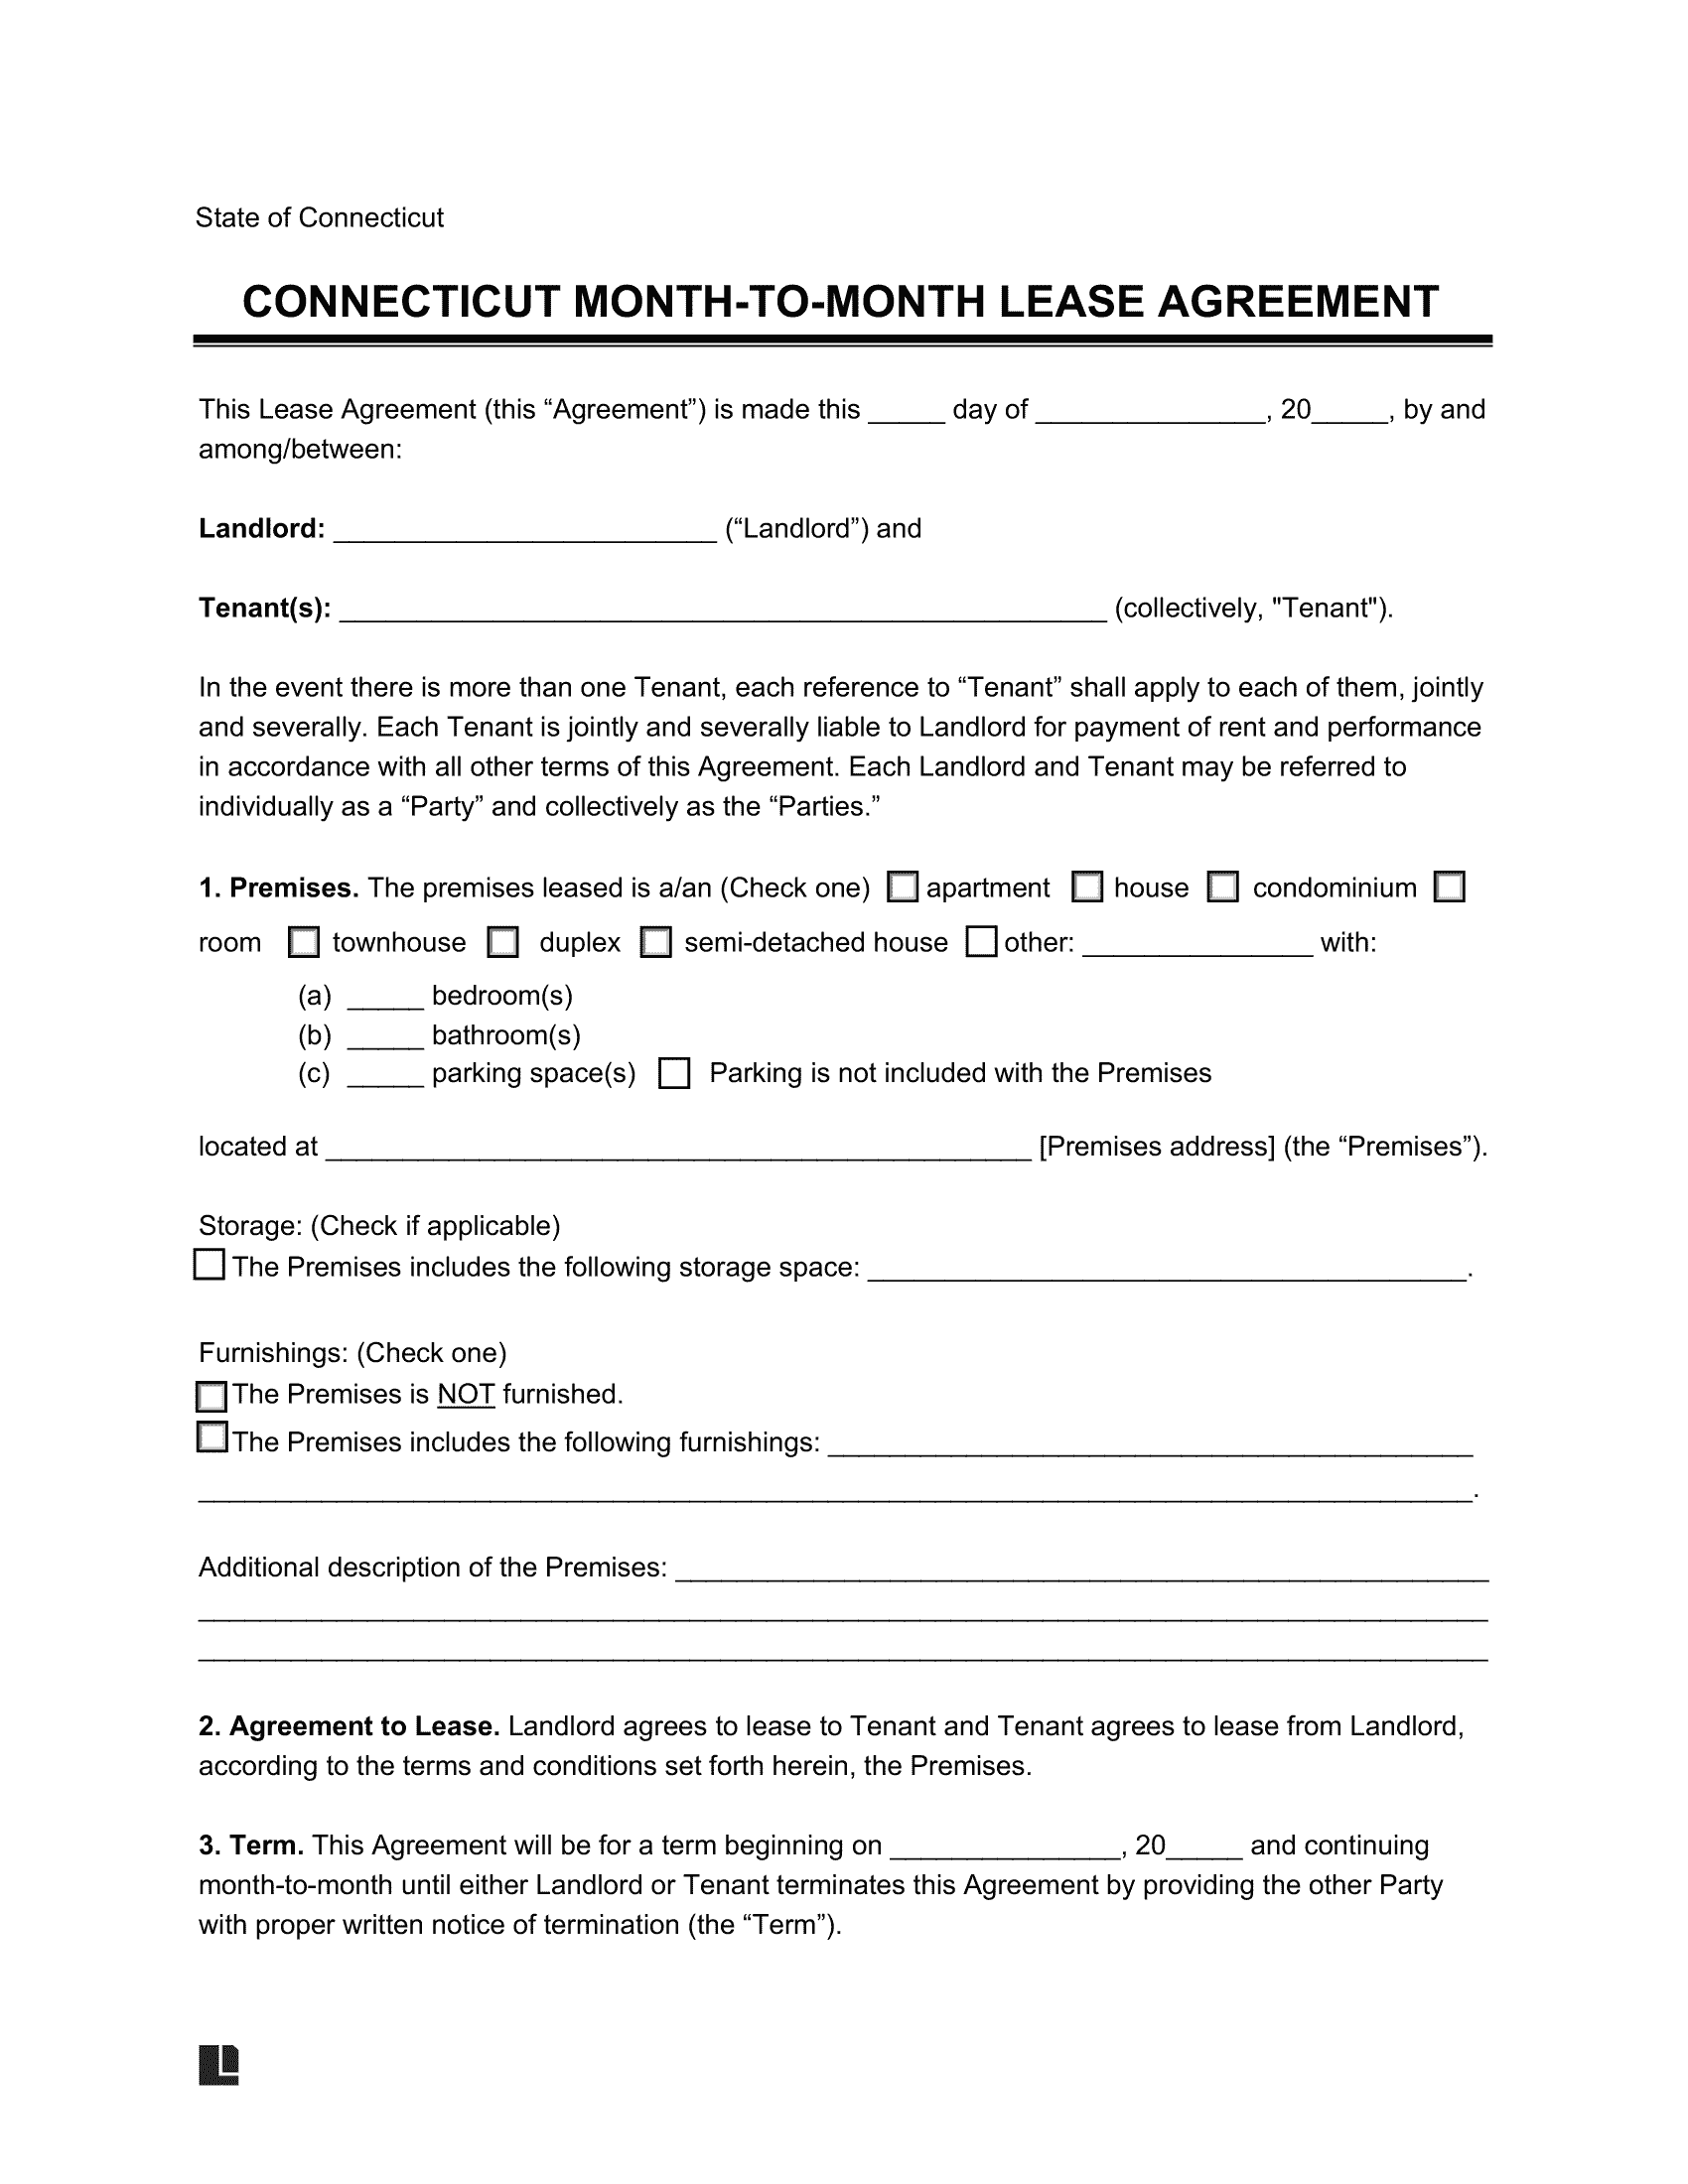 Connecticut Month-to-Month Rental Agreement